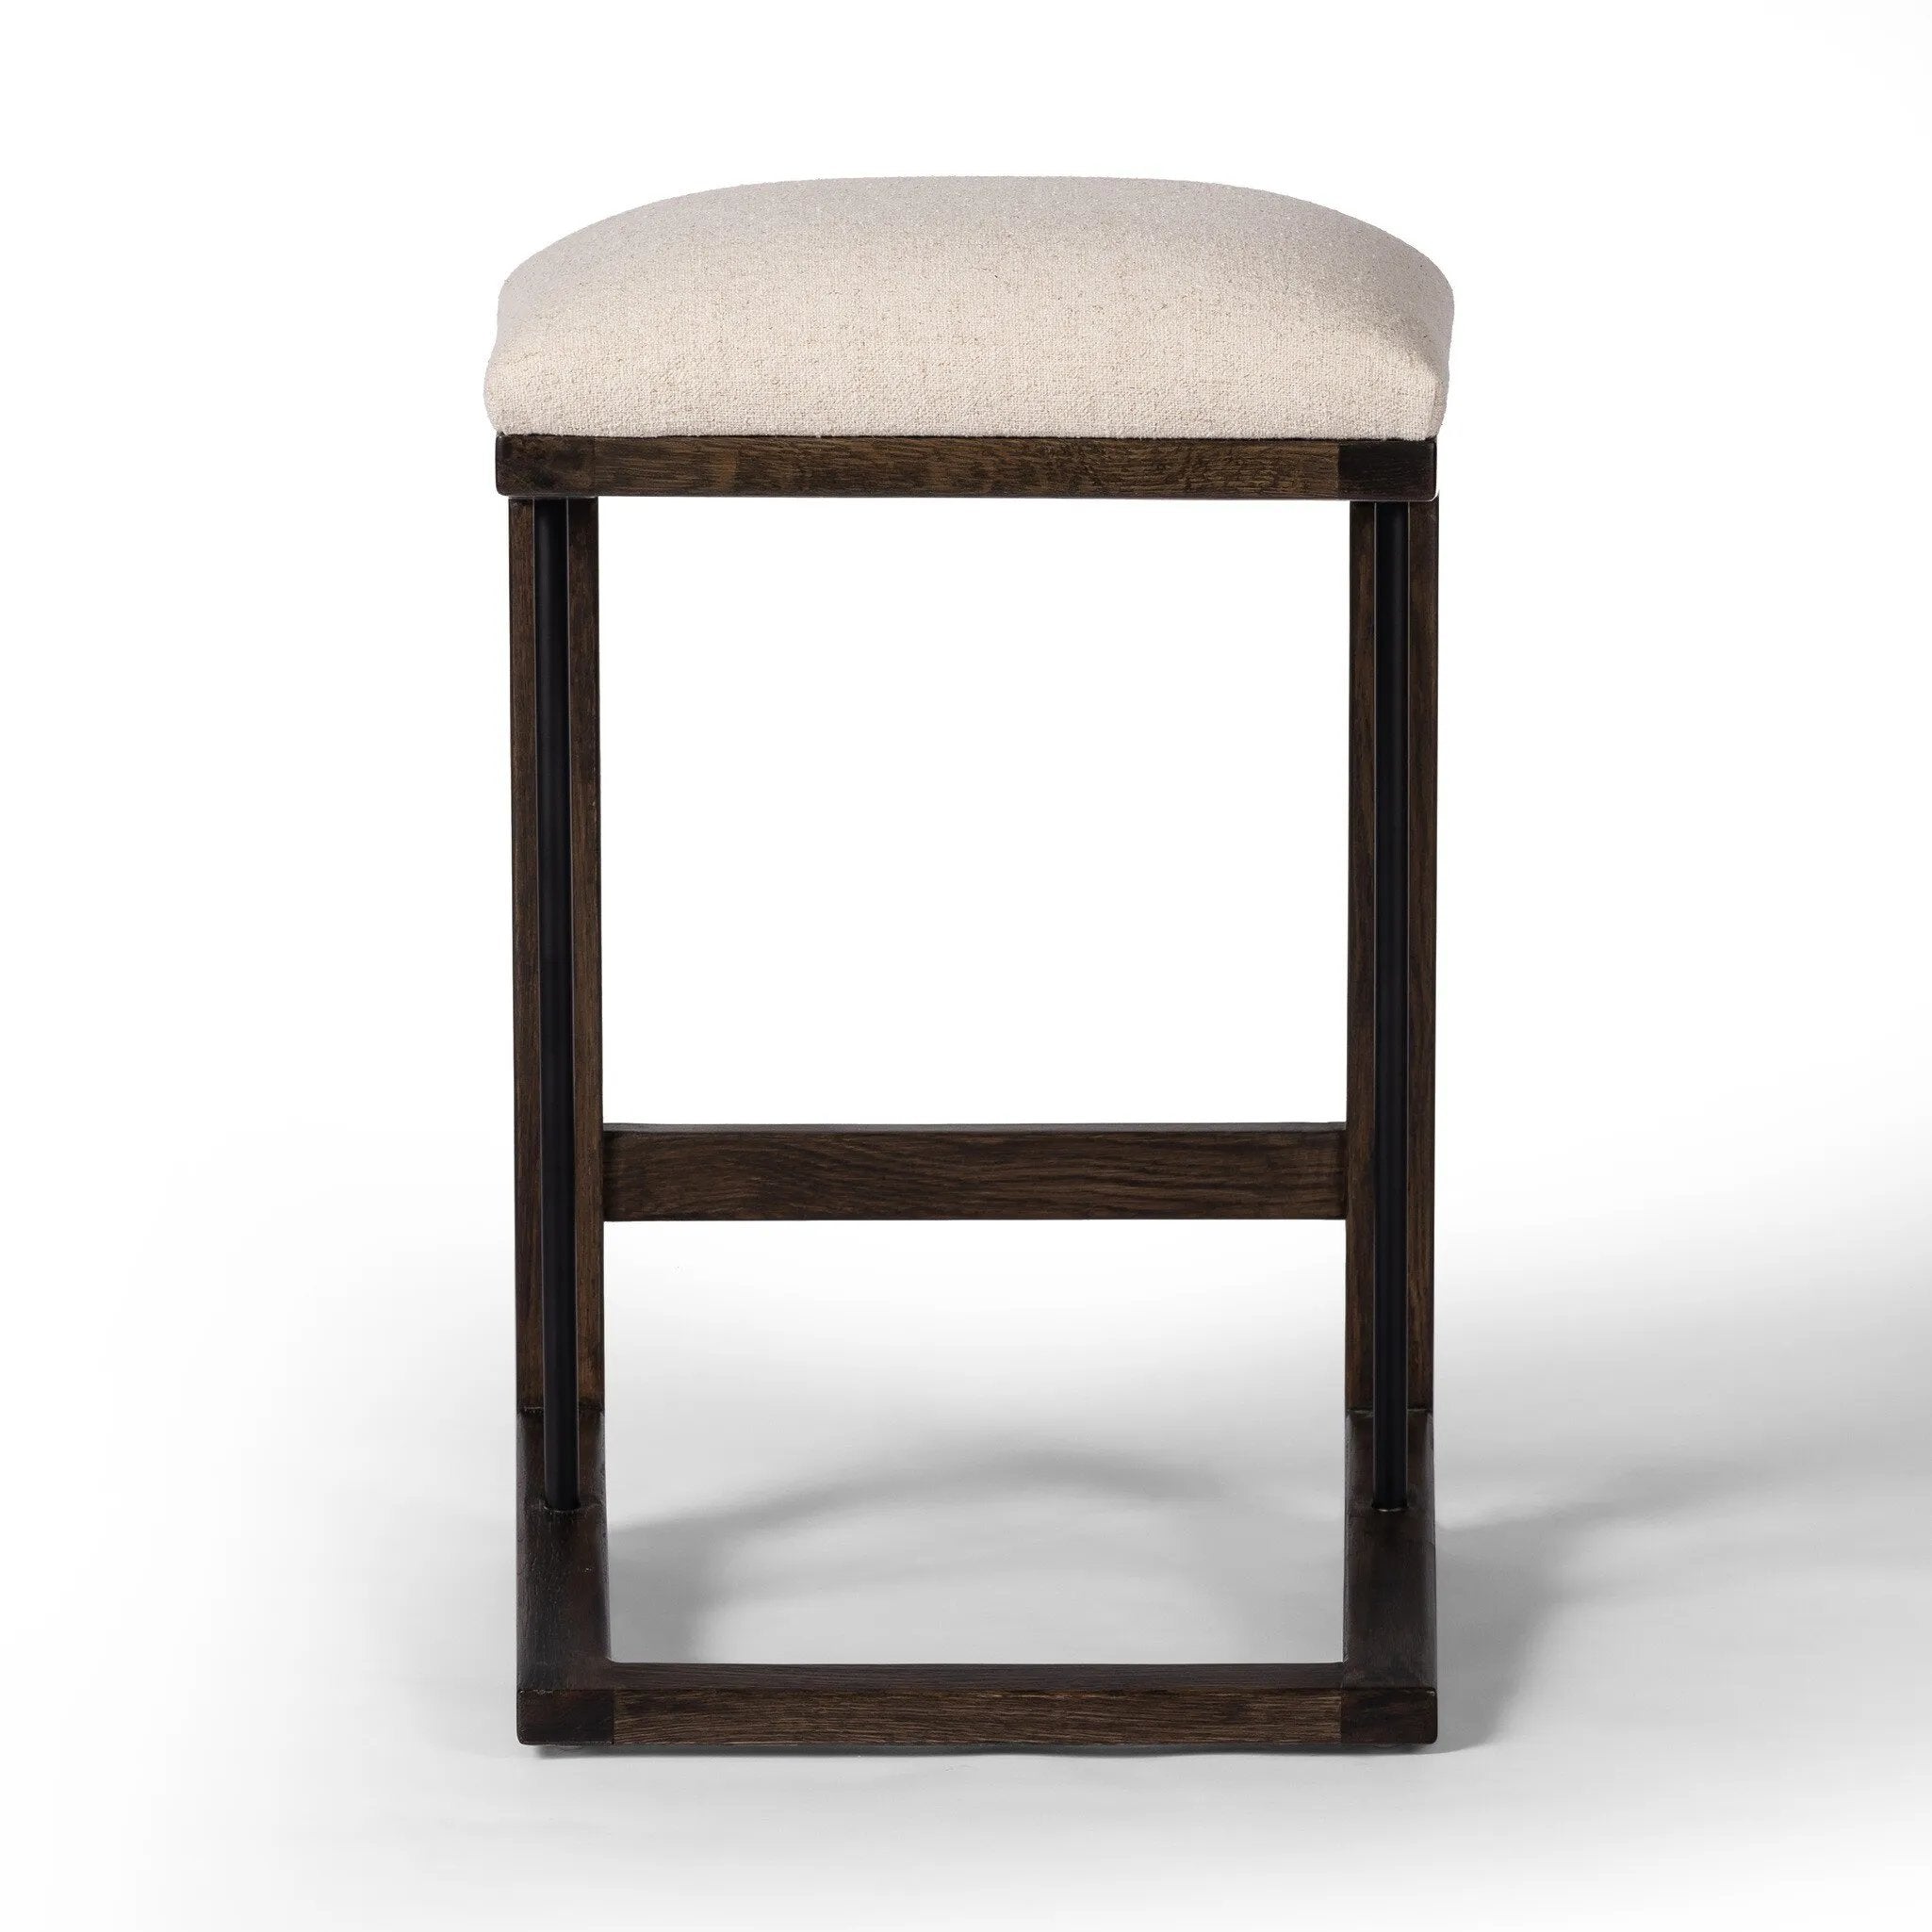 A stunner from every angle, this architecturally inspired stool features an angular base crafted from solid oak with two iron rods for added support and visual interest. Seat is upholstered in a linen/cotton/poly blend performance fabric with subtle texture throughout. Amethyst Home provides interior design, new home construction design consulting, vintage area rugs, and lighting in the Scottsdale metro area.